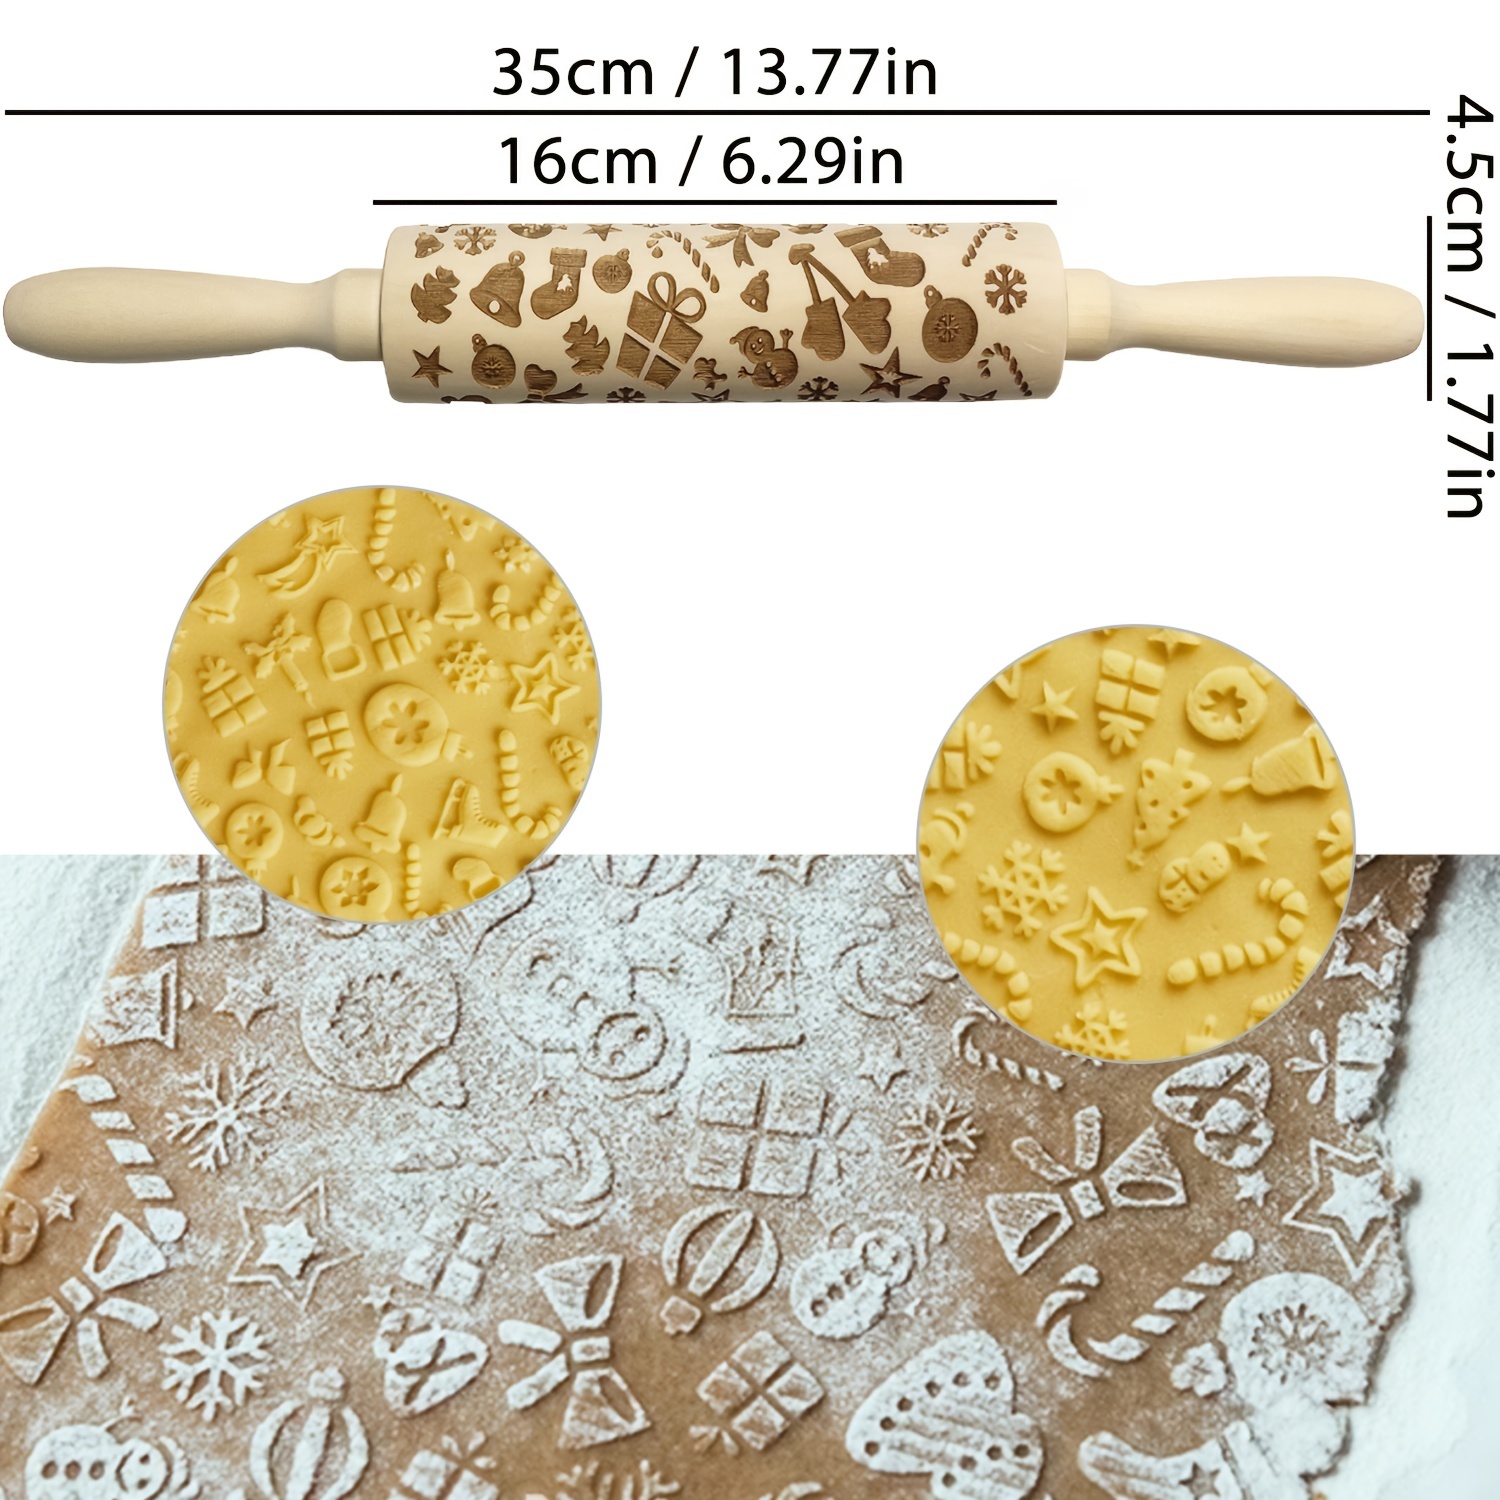 Snowflake 3 Embossed Rolling Pin, Christmas Gift, Textured Cookie